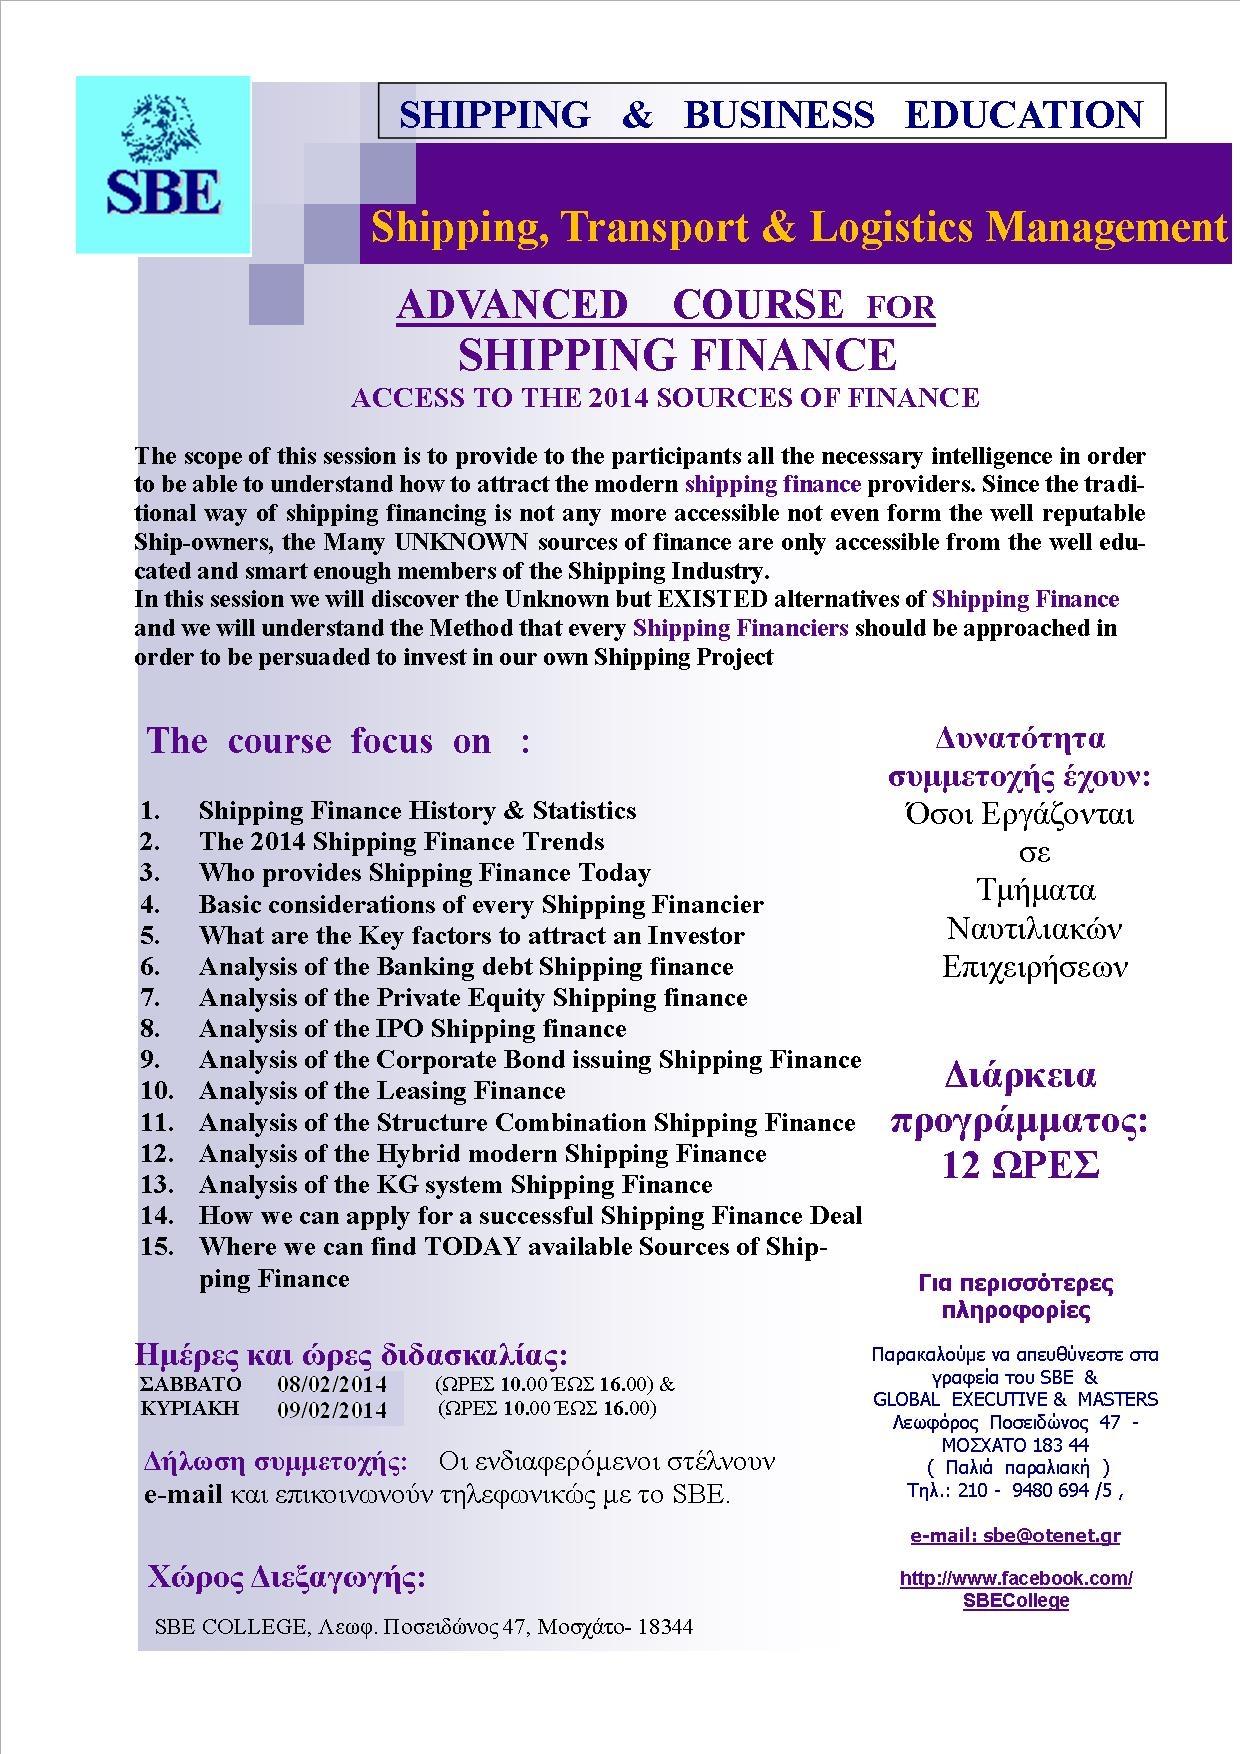 SBE – Advanced cource for Shipping Finance Access to the 2014 sources of Finance